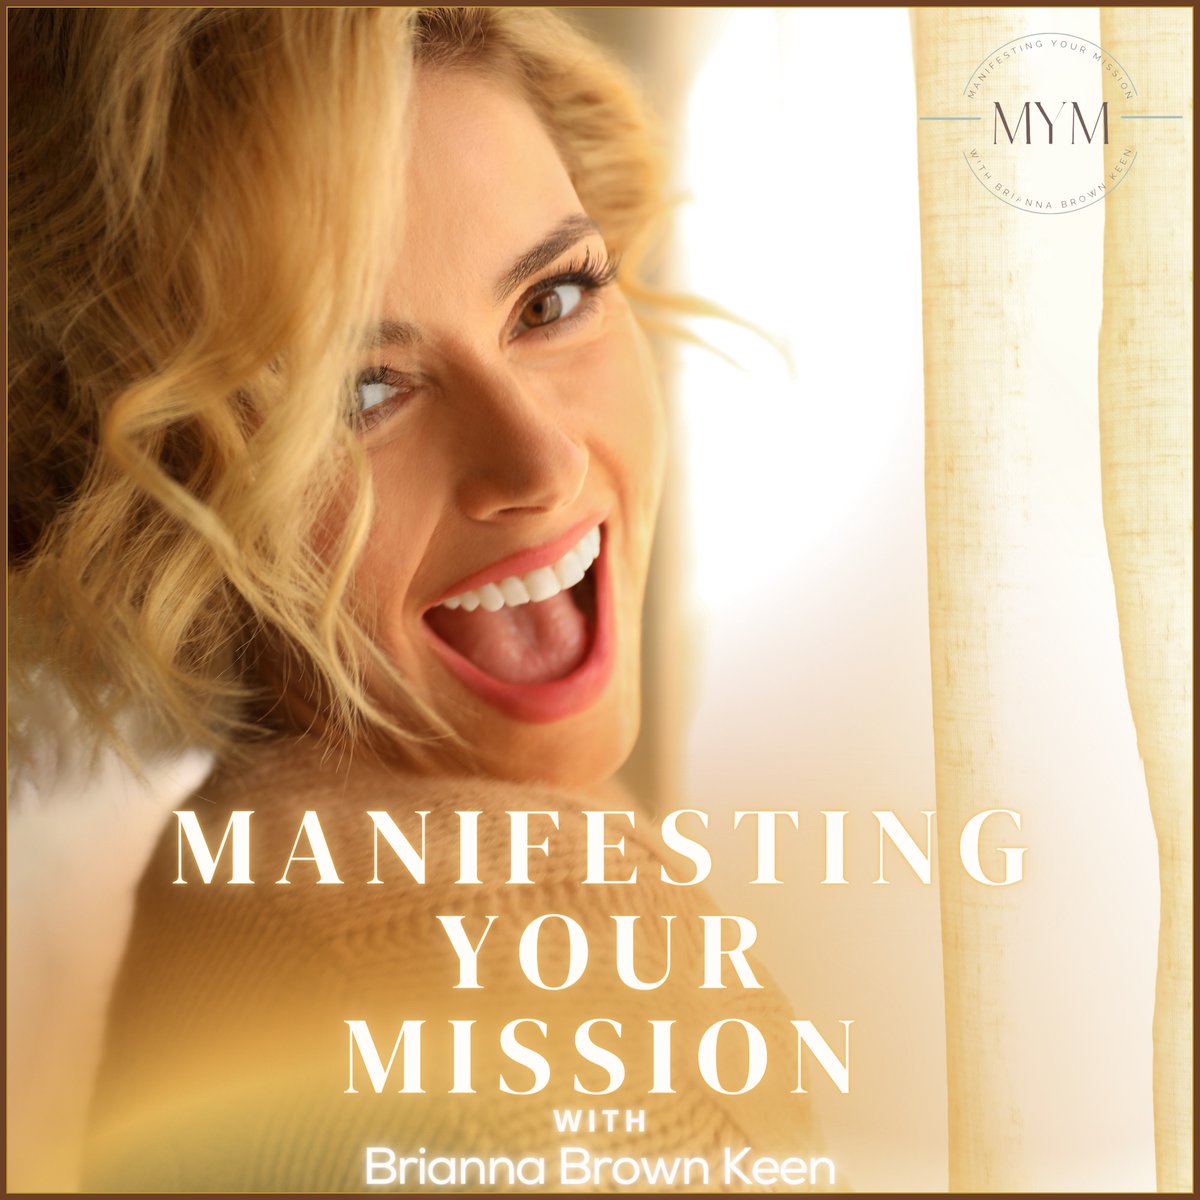 It's official... my new podcast, Manifesting Your Mission with Brianna Brown Keen, is officially launching JUNE 3rd! Like and subscribe on Spotify and Apple Podcasts now!

#BriannaBrownKeen #BriannaBrown #MYMPodcast #ManifestingYourMission #PodcastLaunch #TheNewHollywood